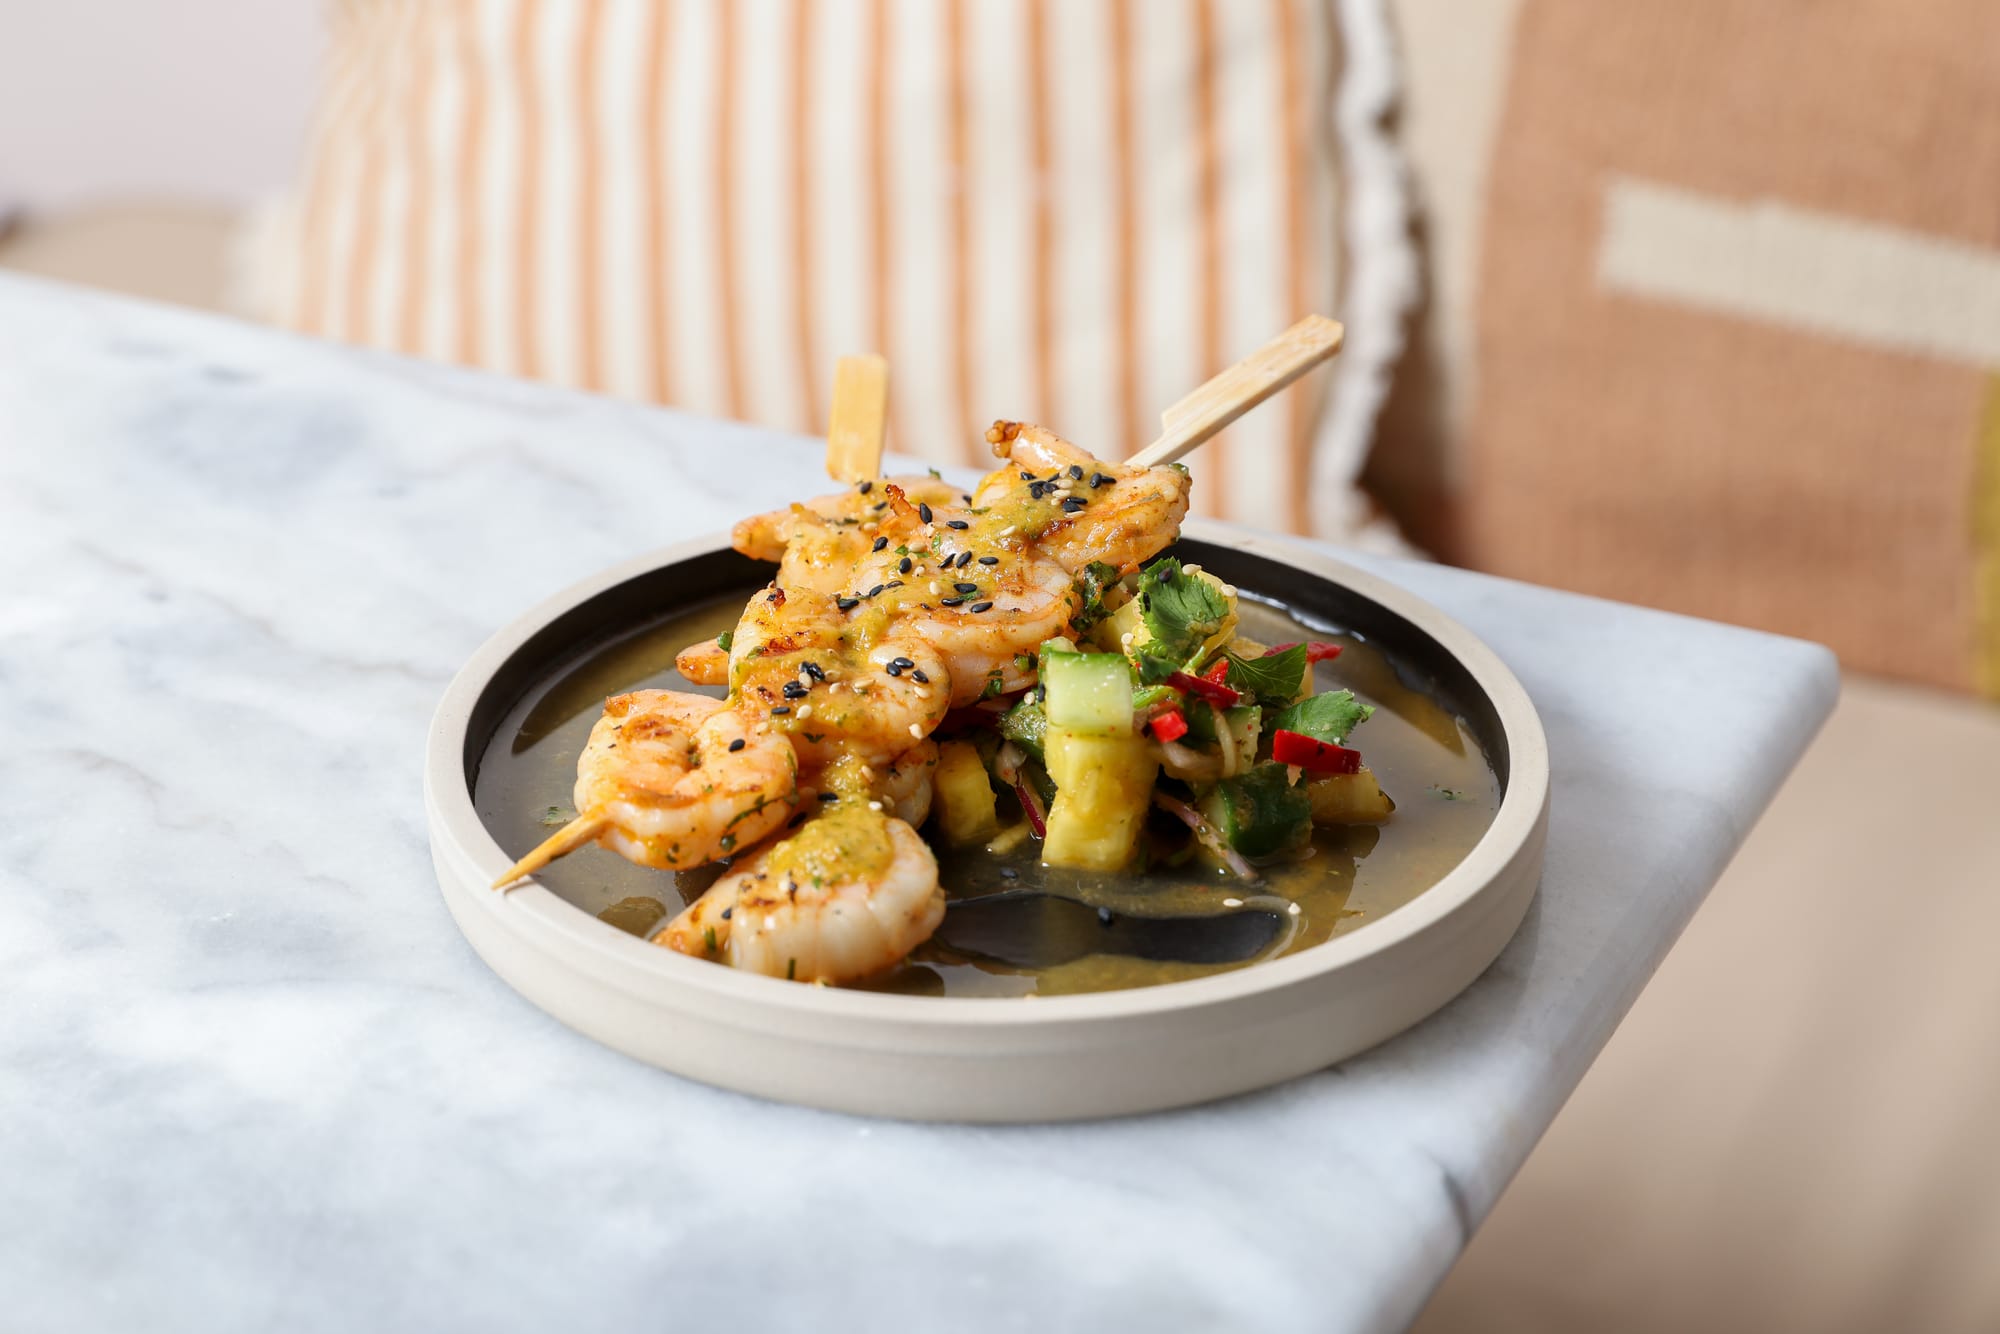 Chili prawn and pineapple skewers with cucumber